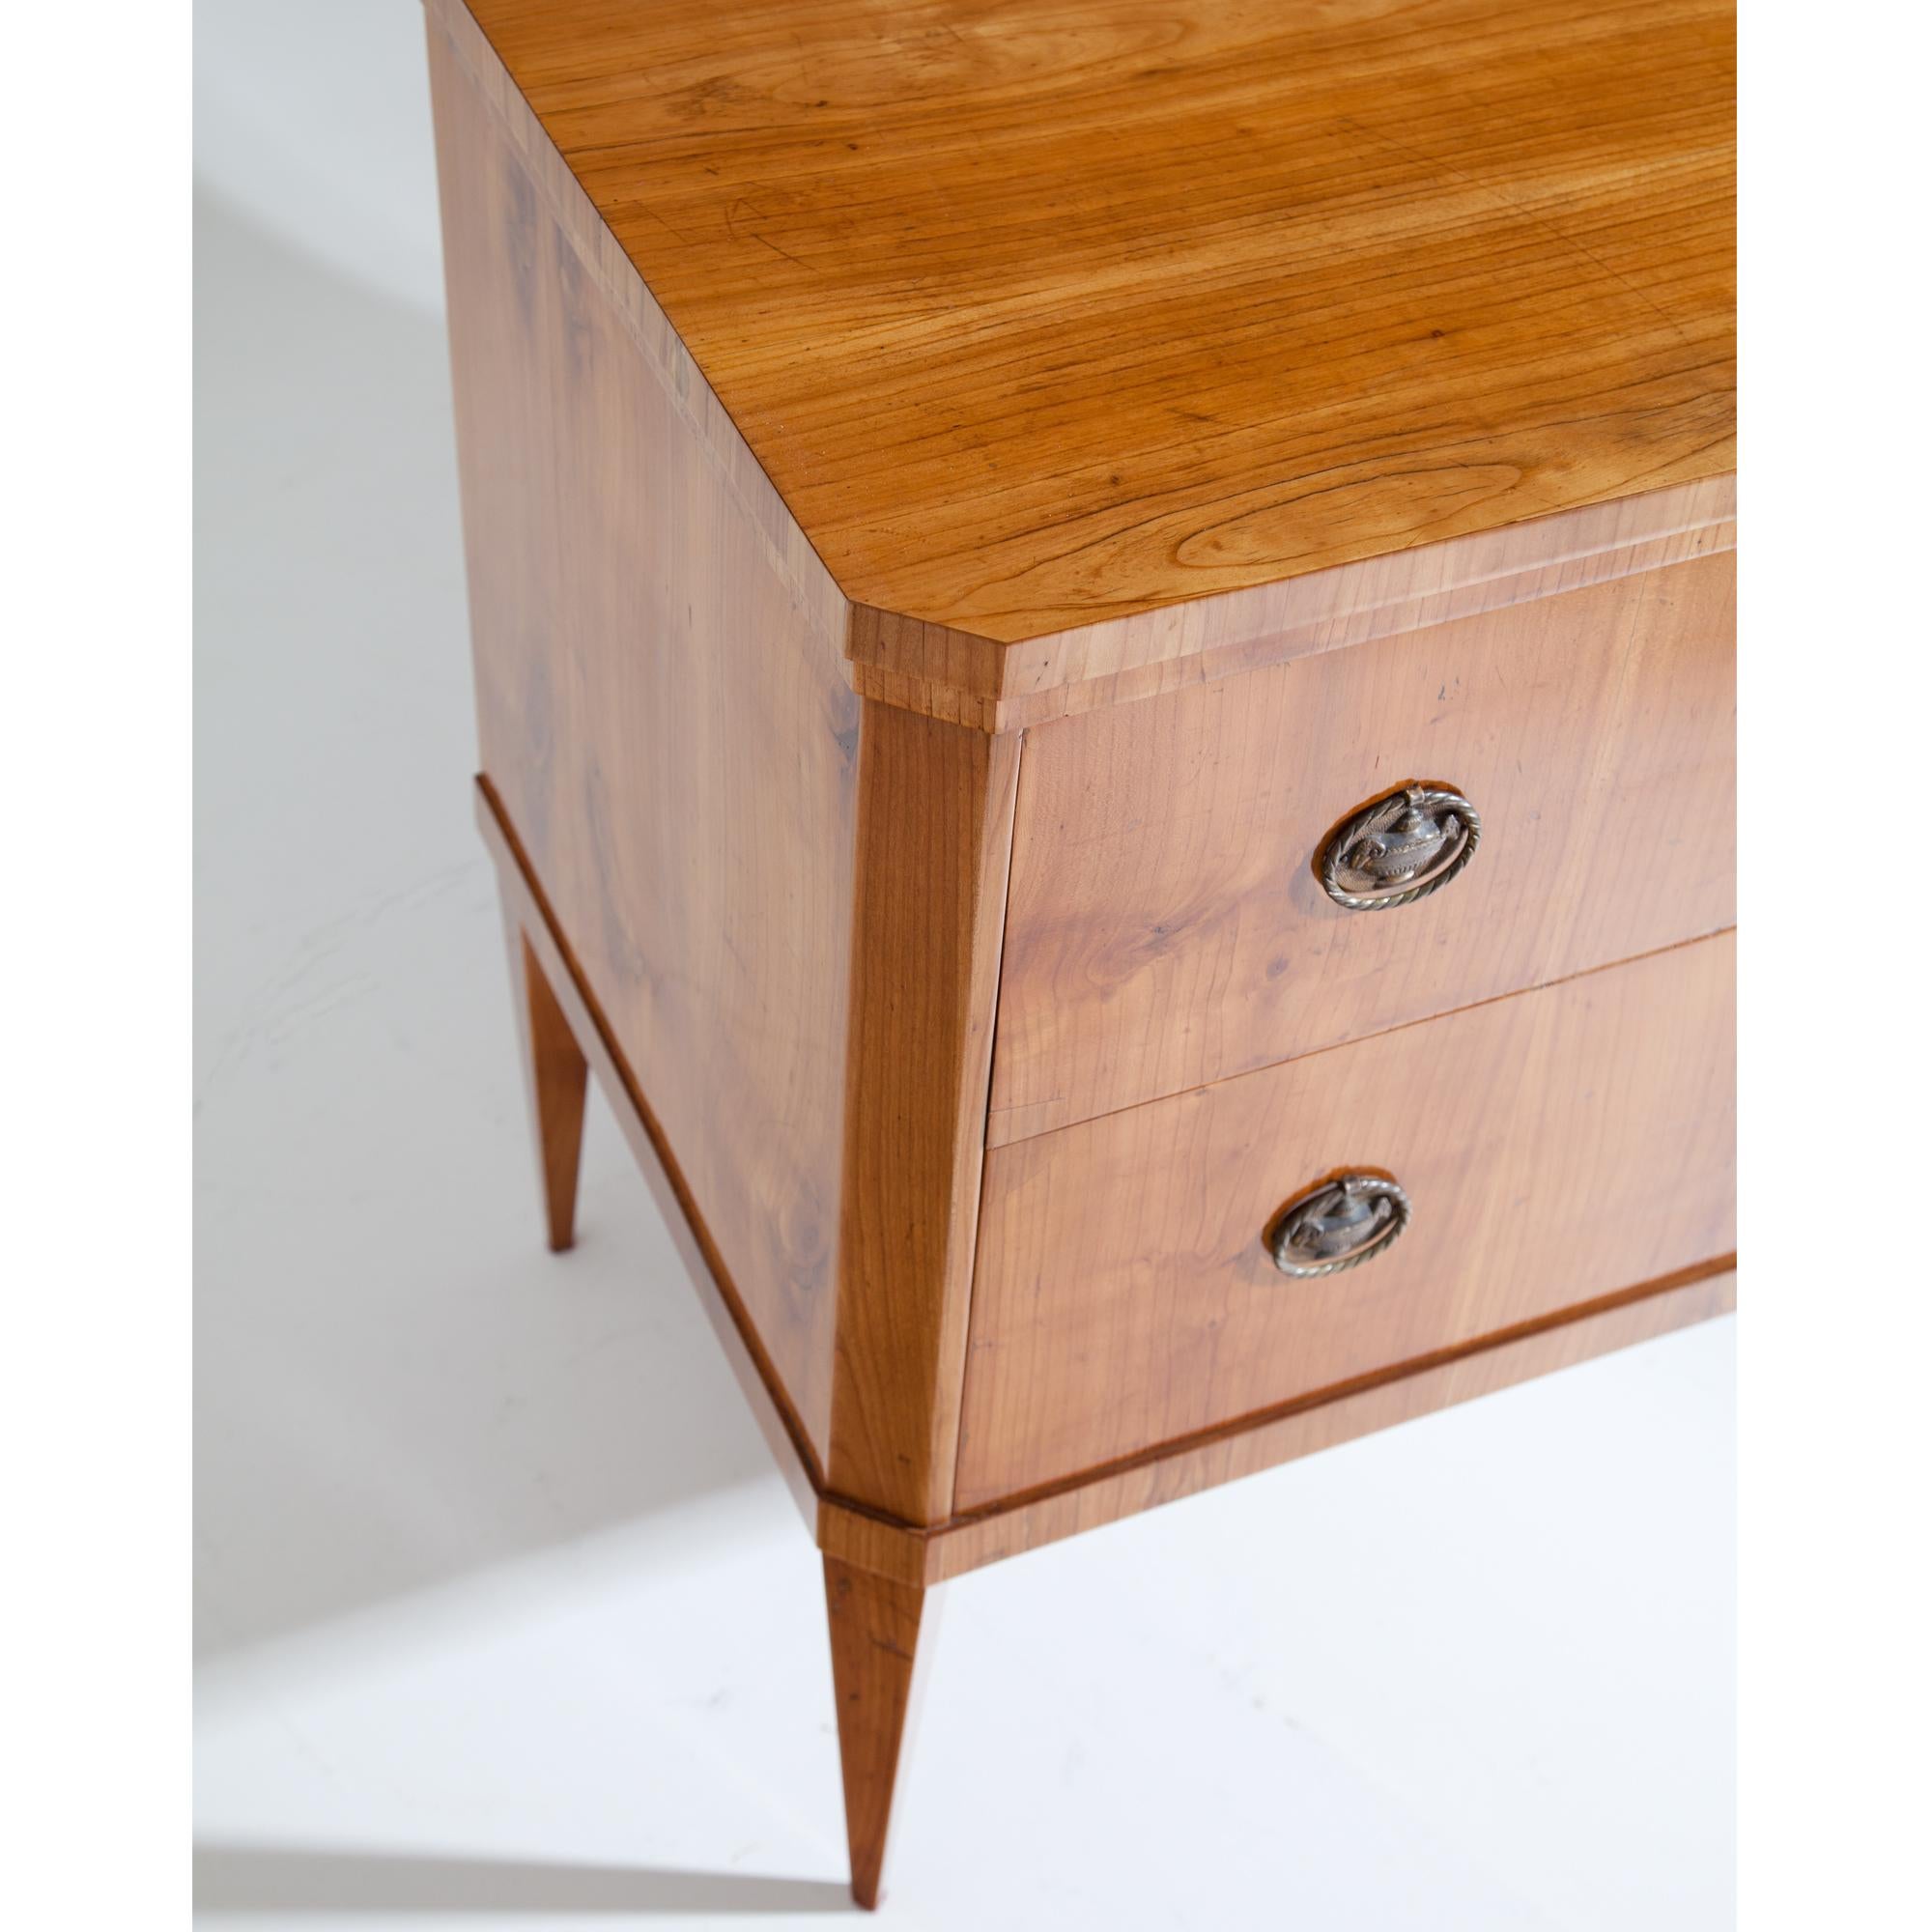 Early 19th Century Biedermeier Chest of Drawers, circa 1820